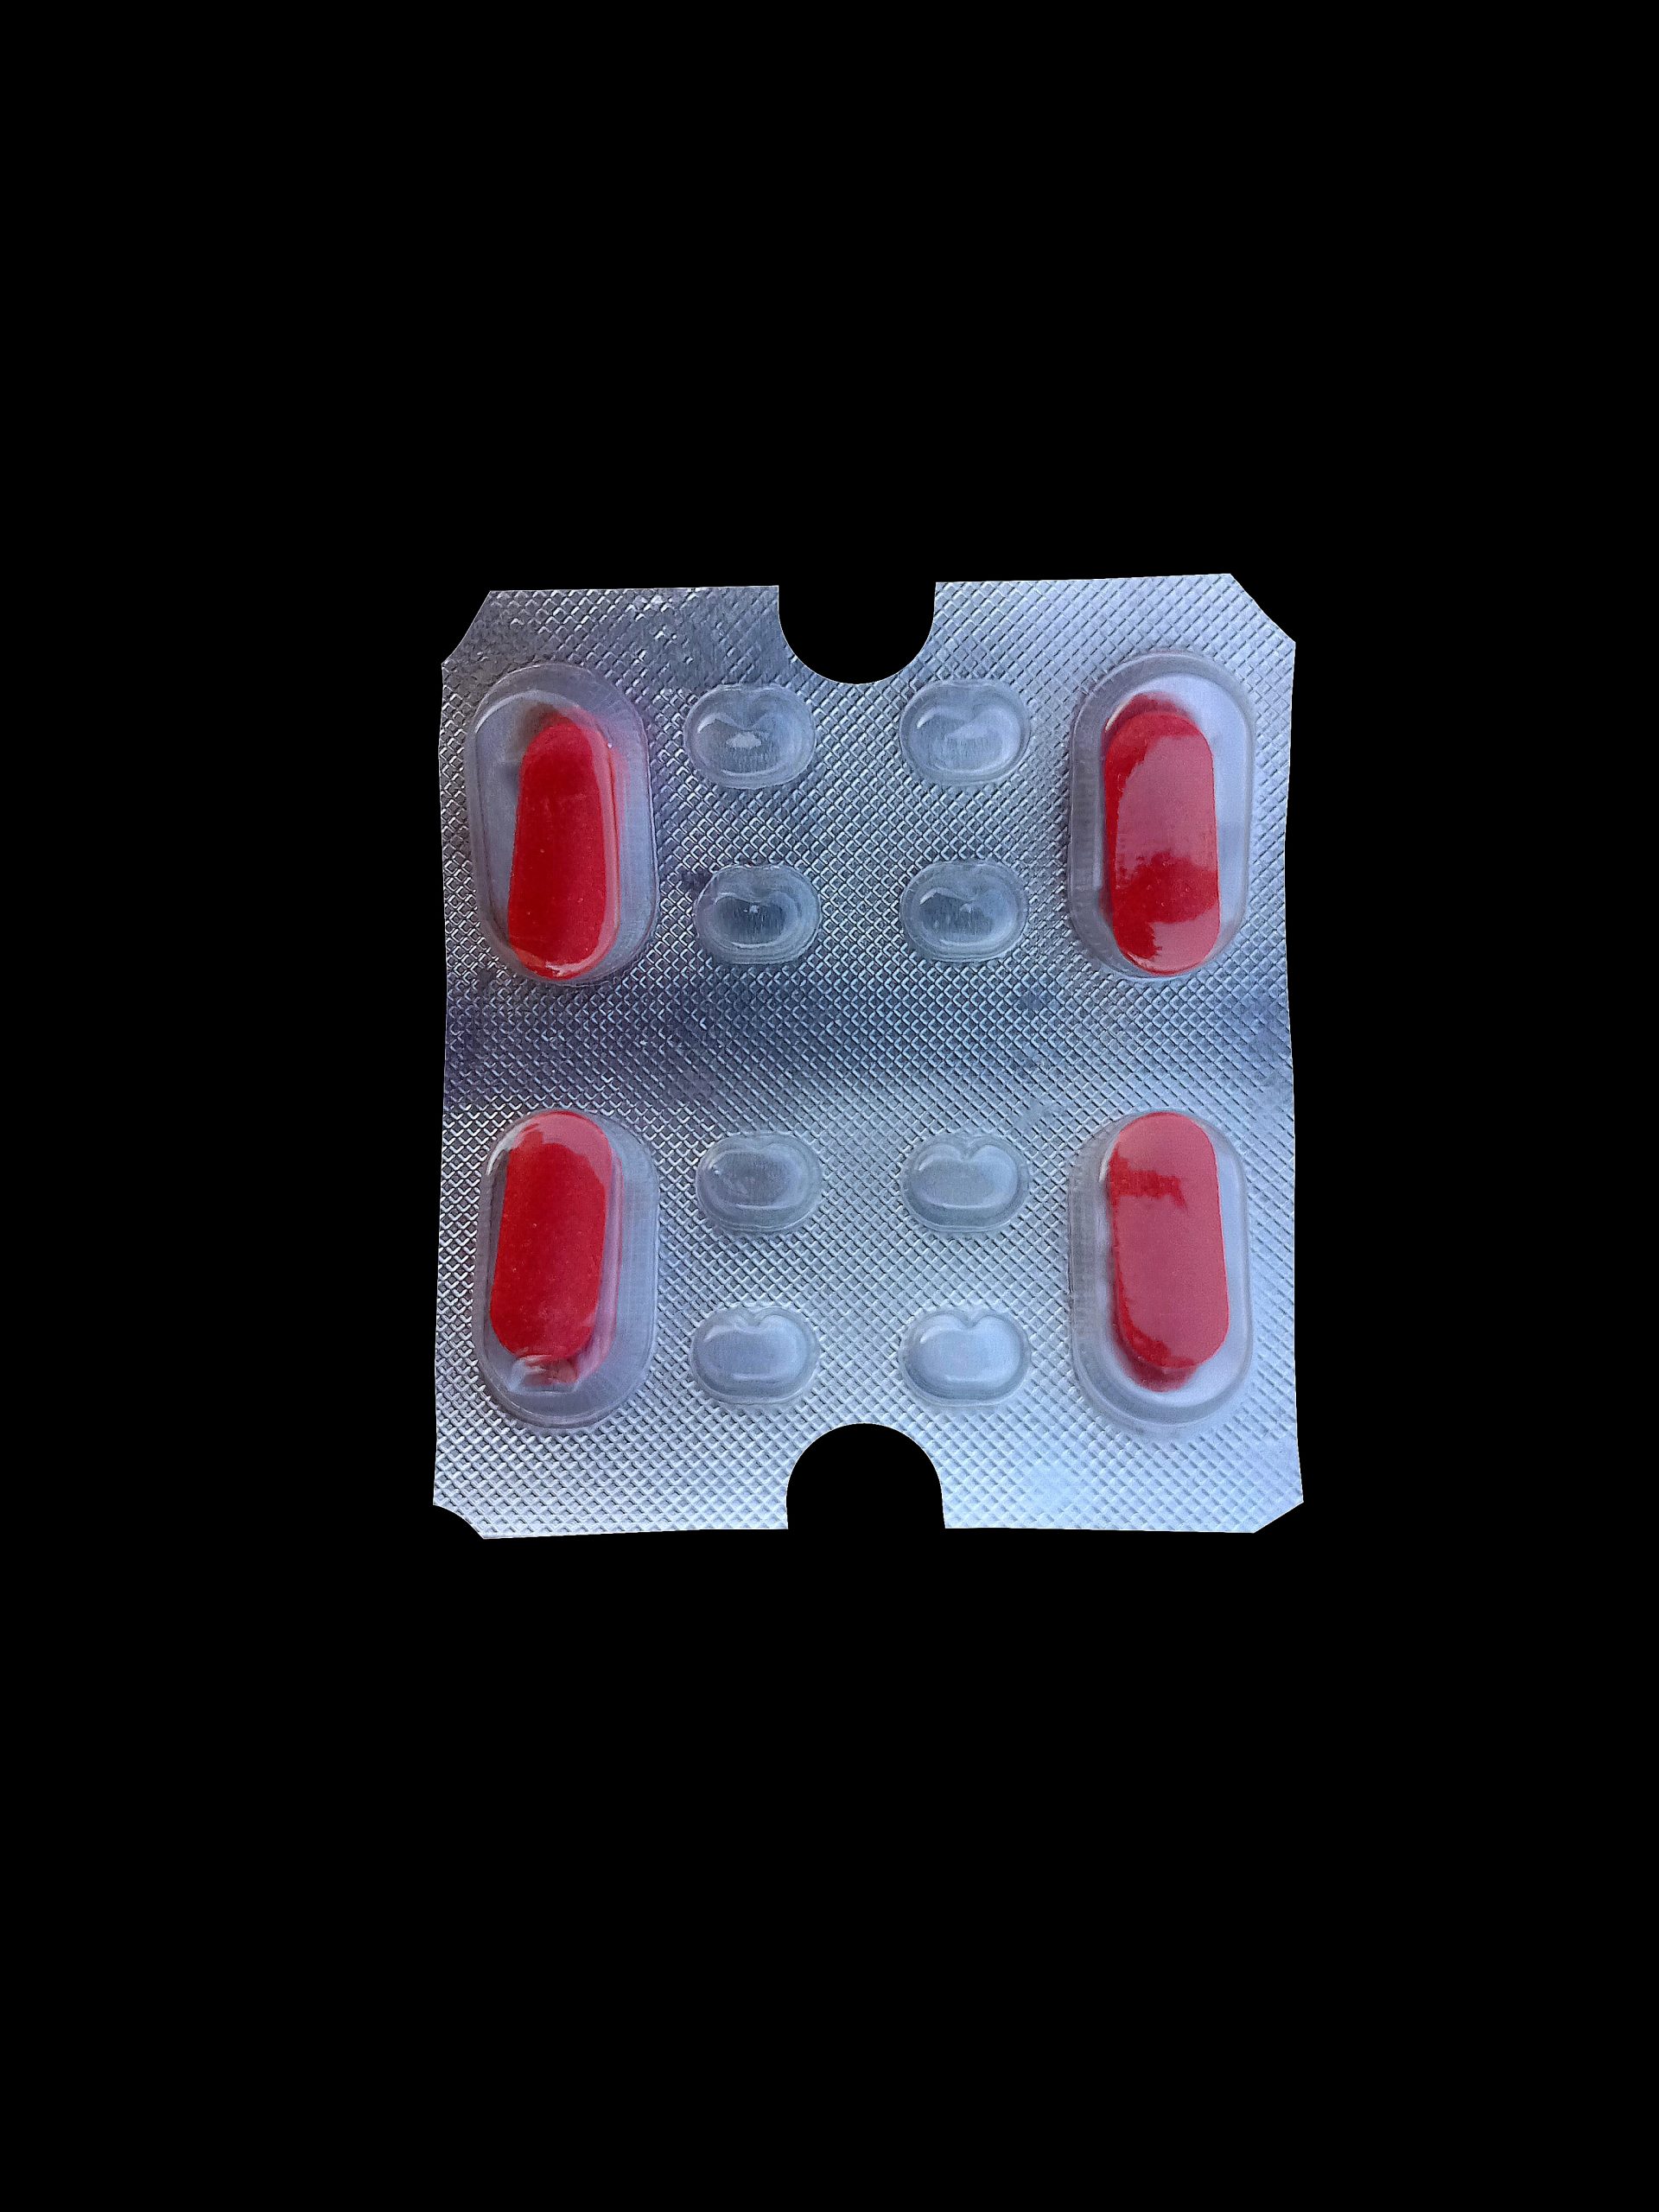 Tablets for treatment